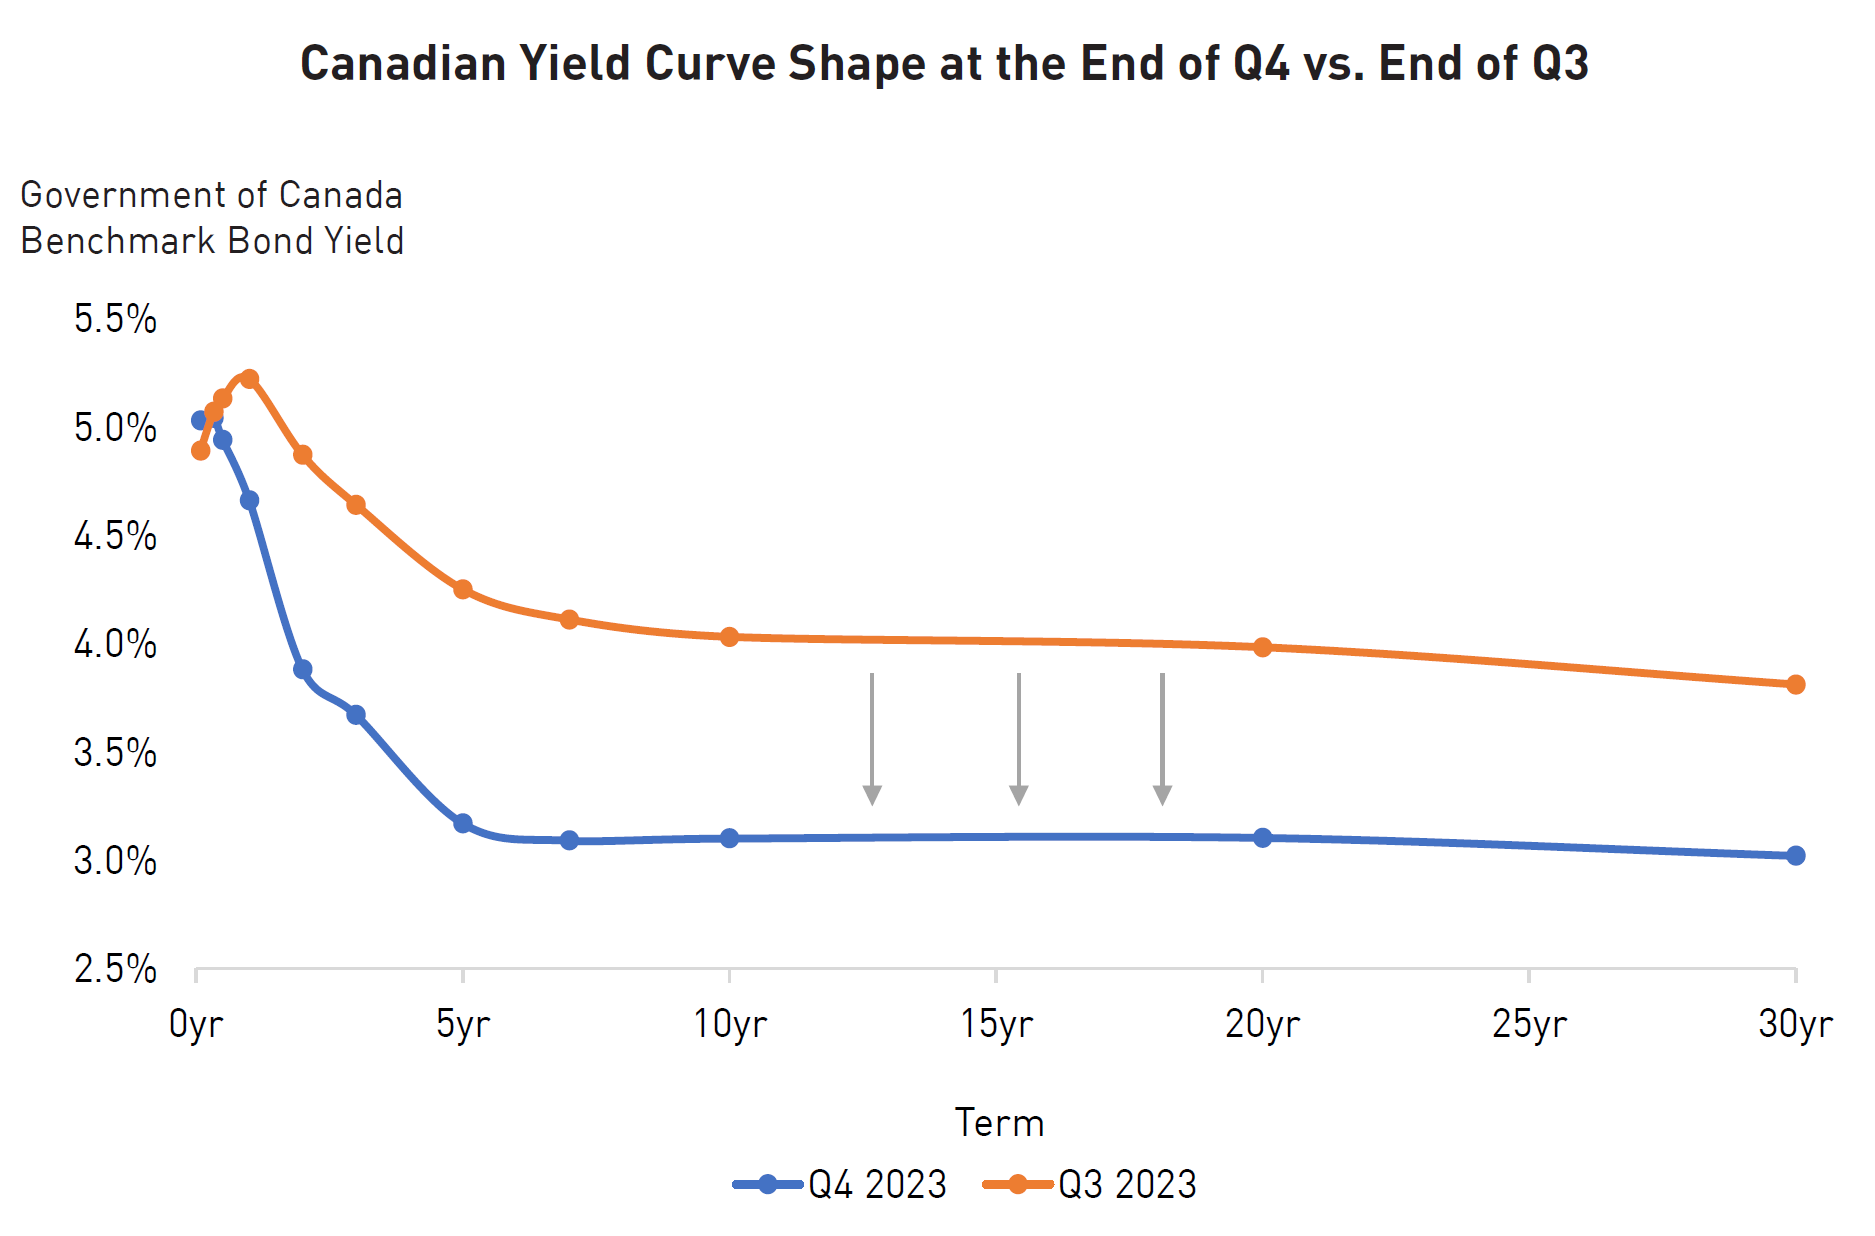 Line chart showing US yield curve shape at the end of Q4 vs. end of Q3